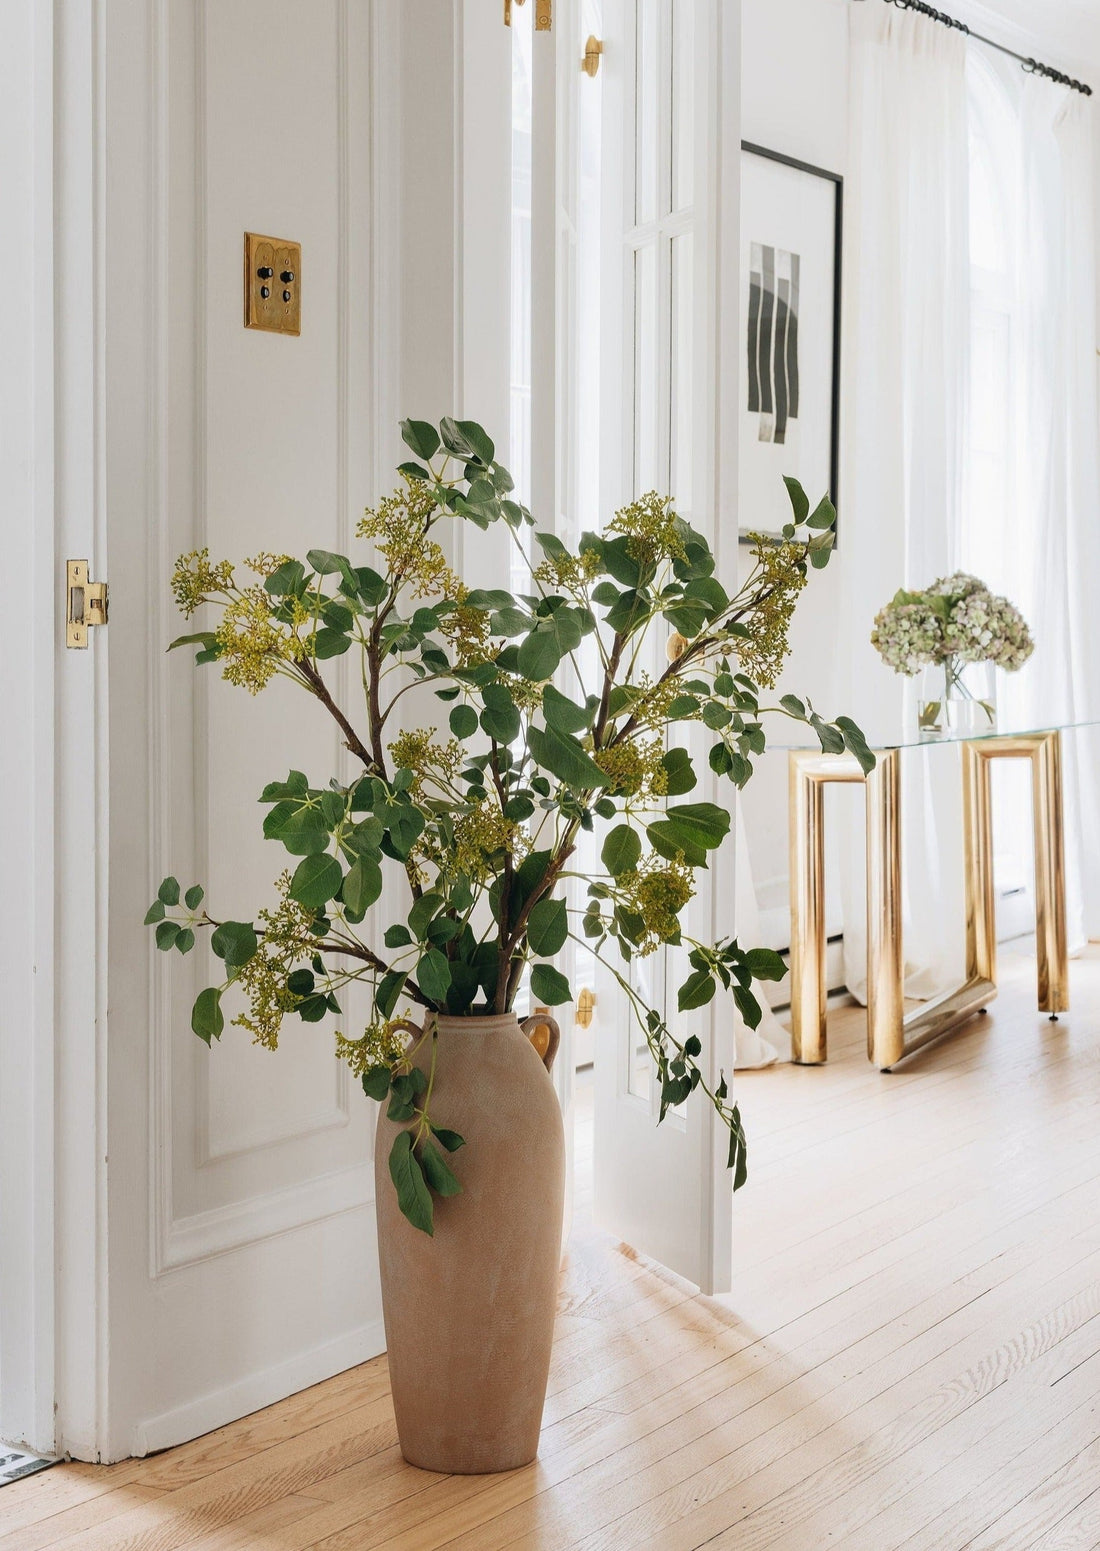 Styling Video of Faux Privet Branch and Tall Terracotta Vase at afloral